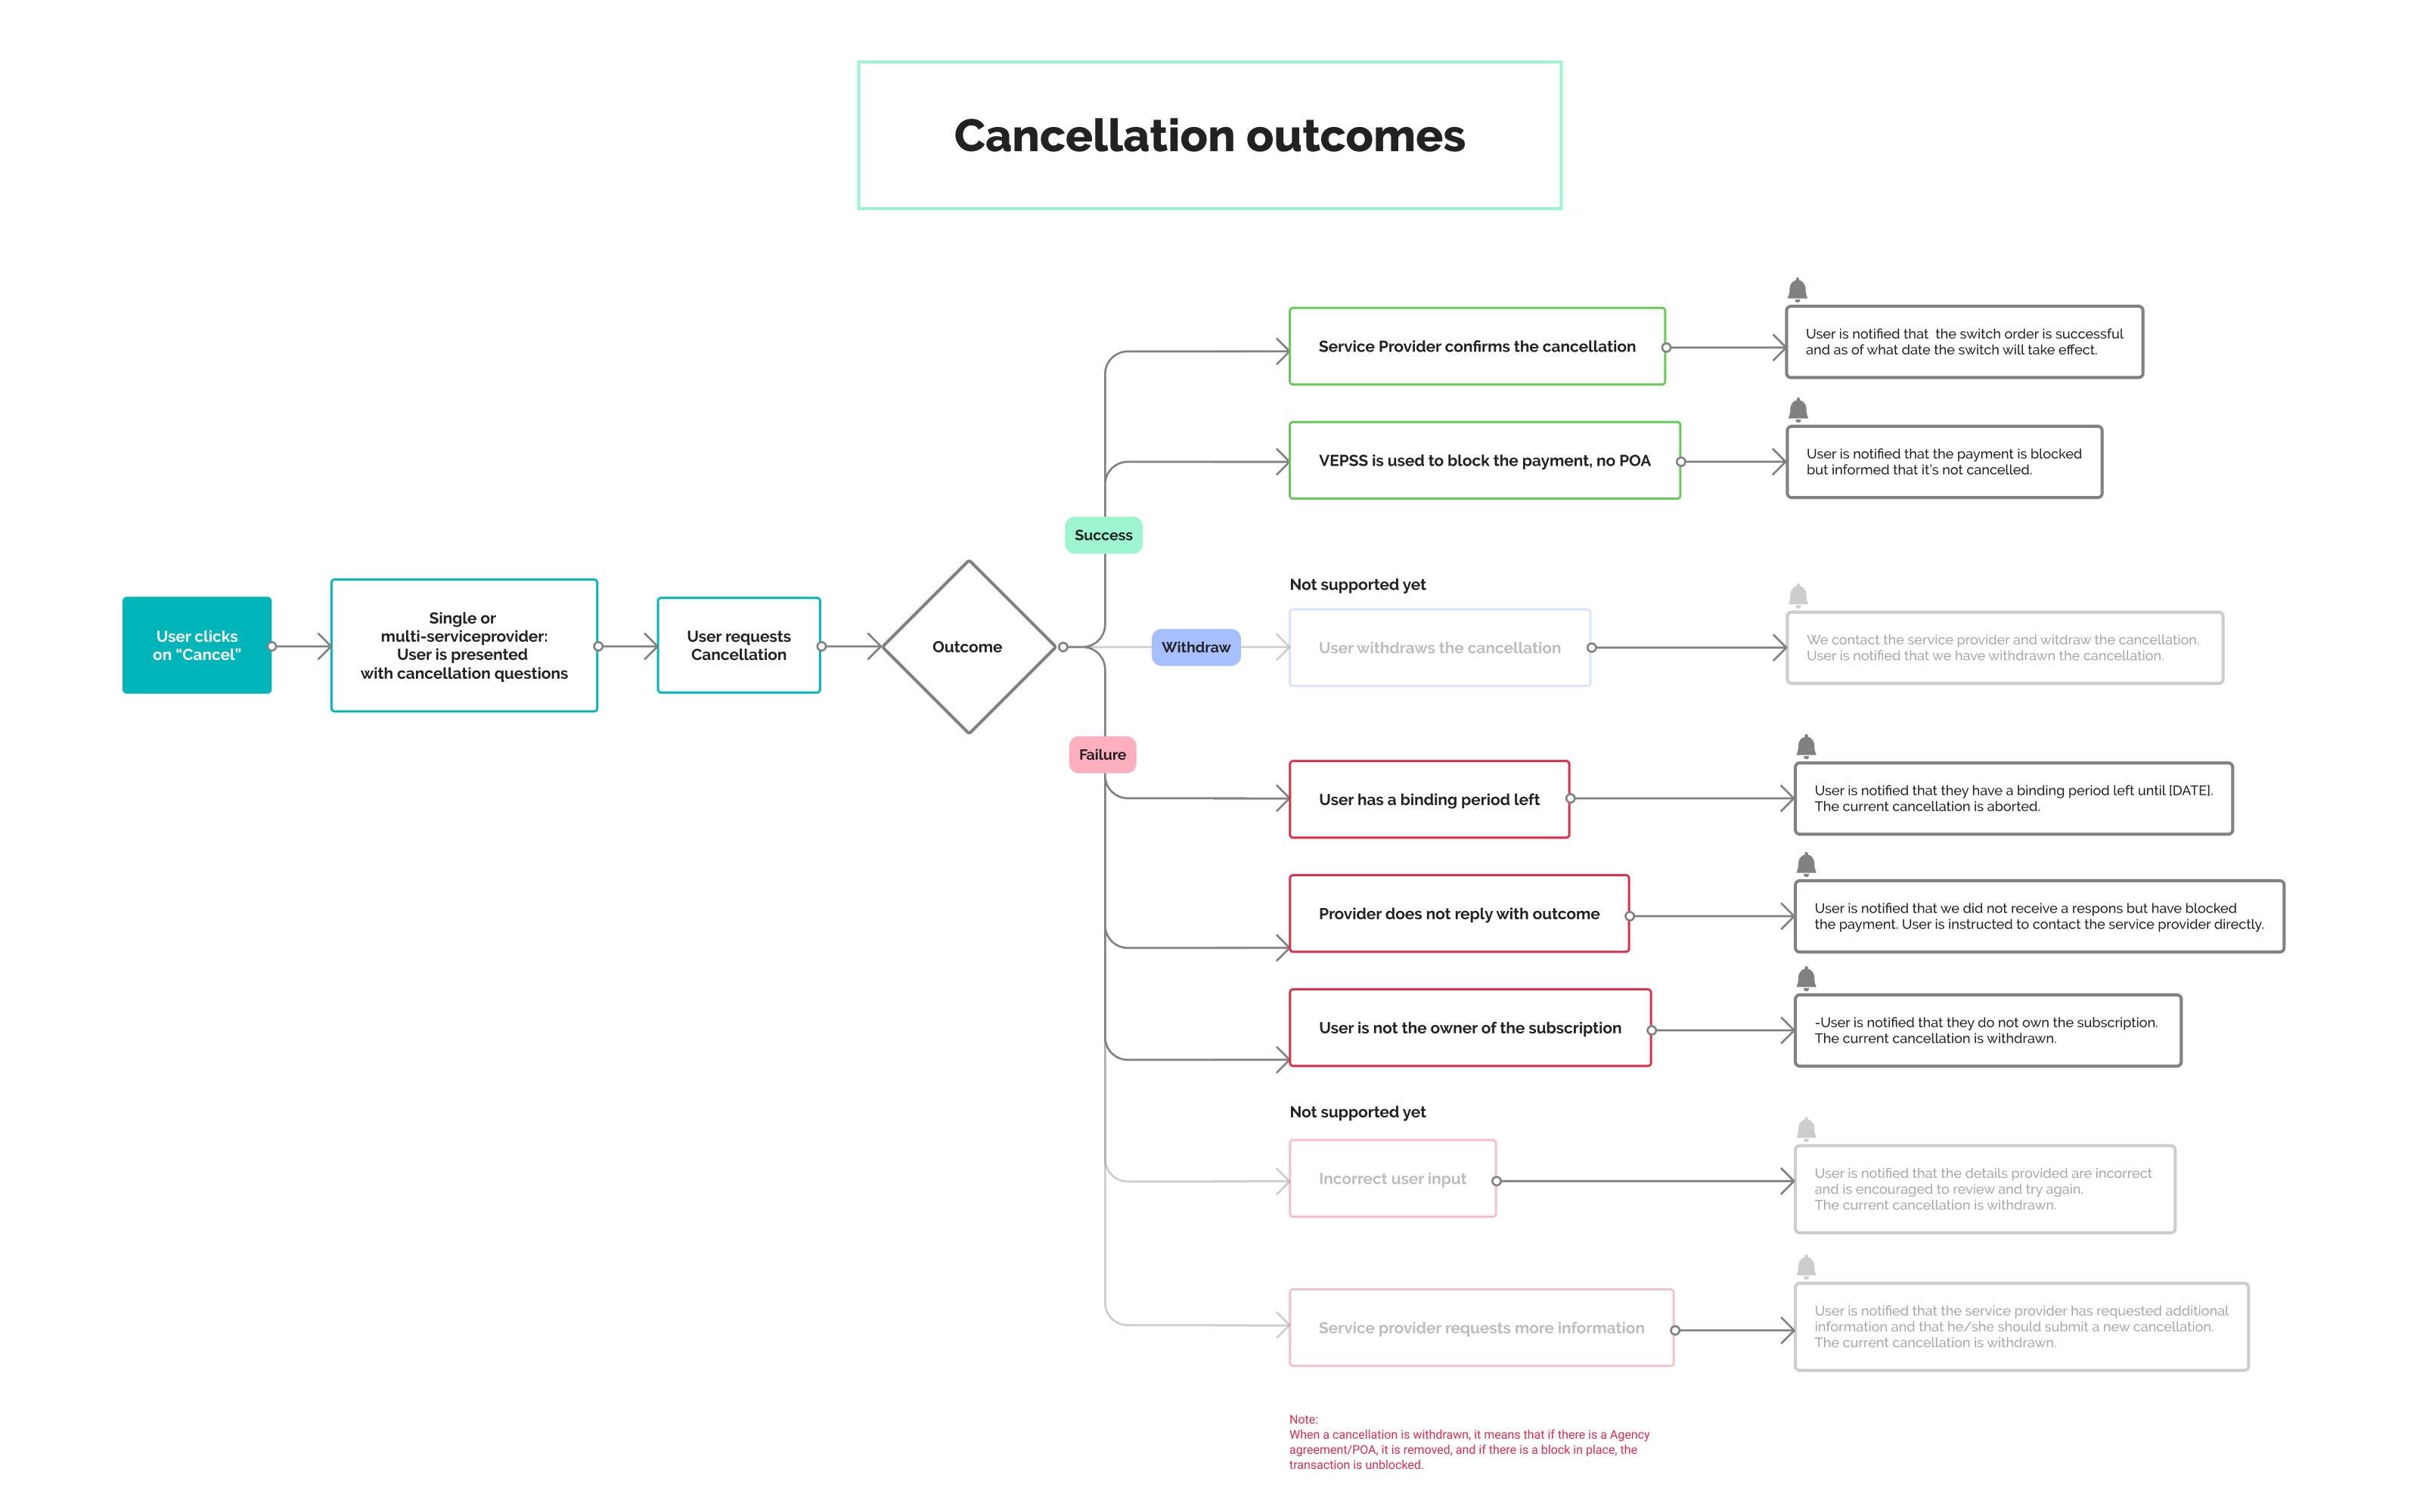 The Cancellation outcomes shows the different options for response when a user requests to cancel a service